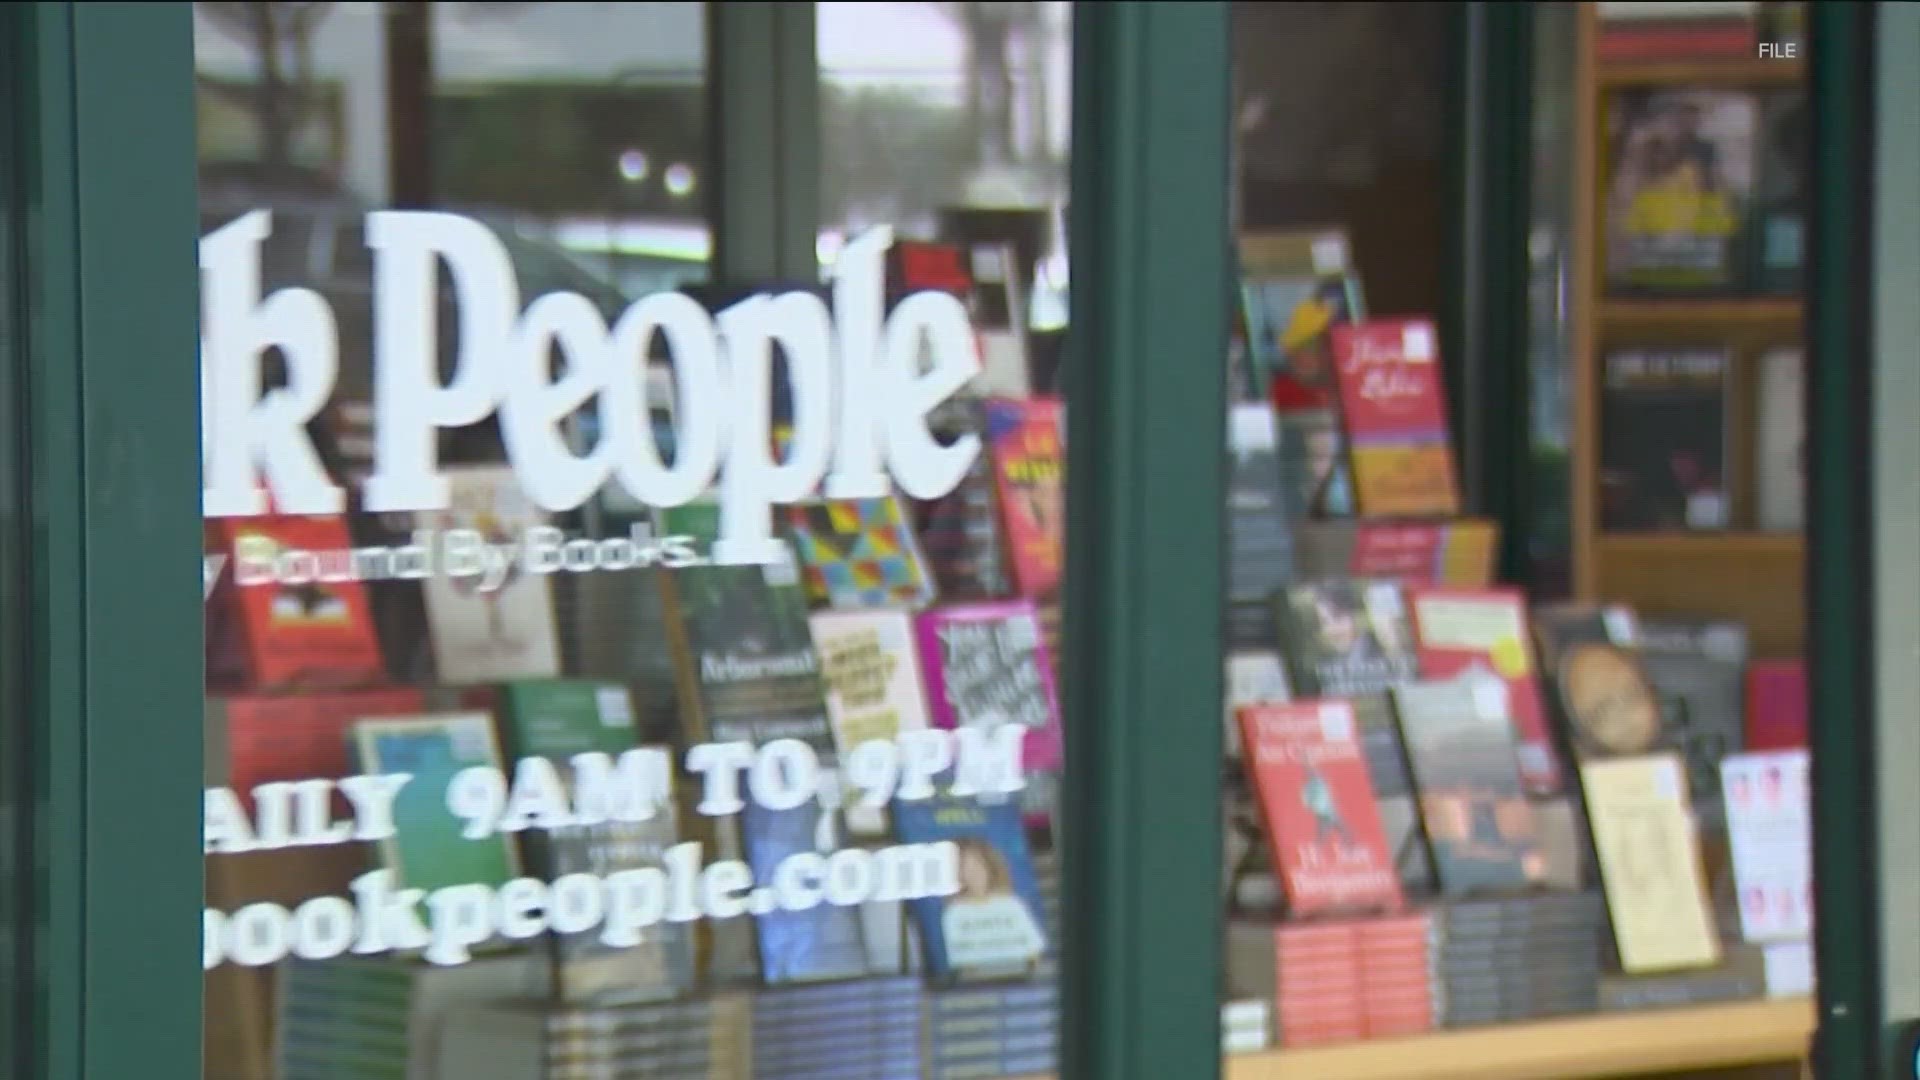 A Texas law that bookshops are fighting remains on hold after a court denied a petition to re-hear the case.